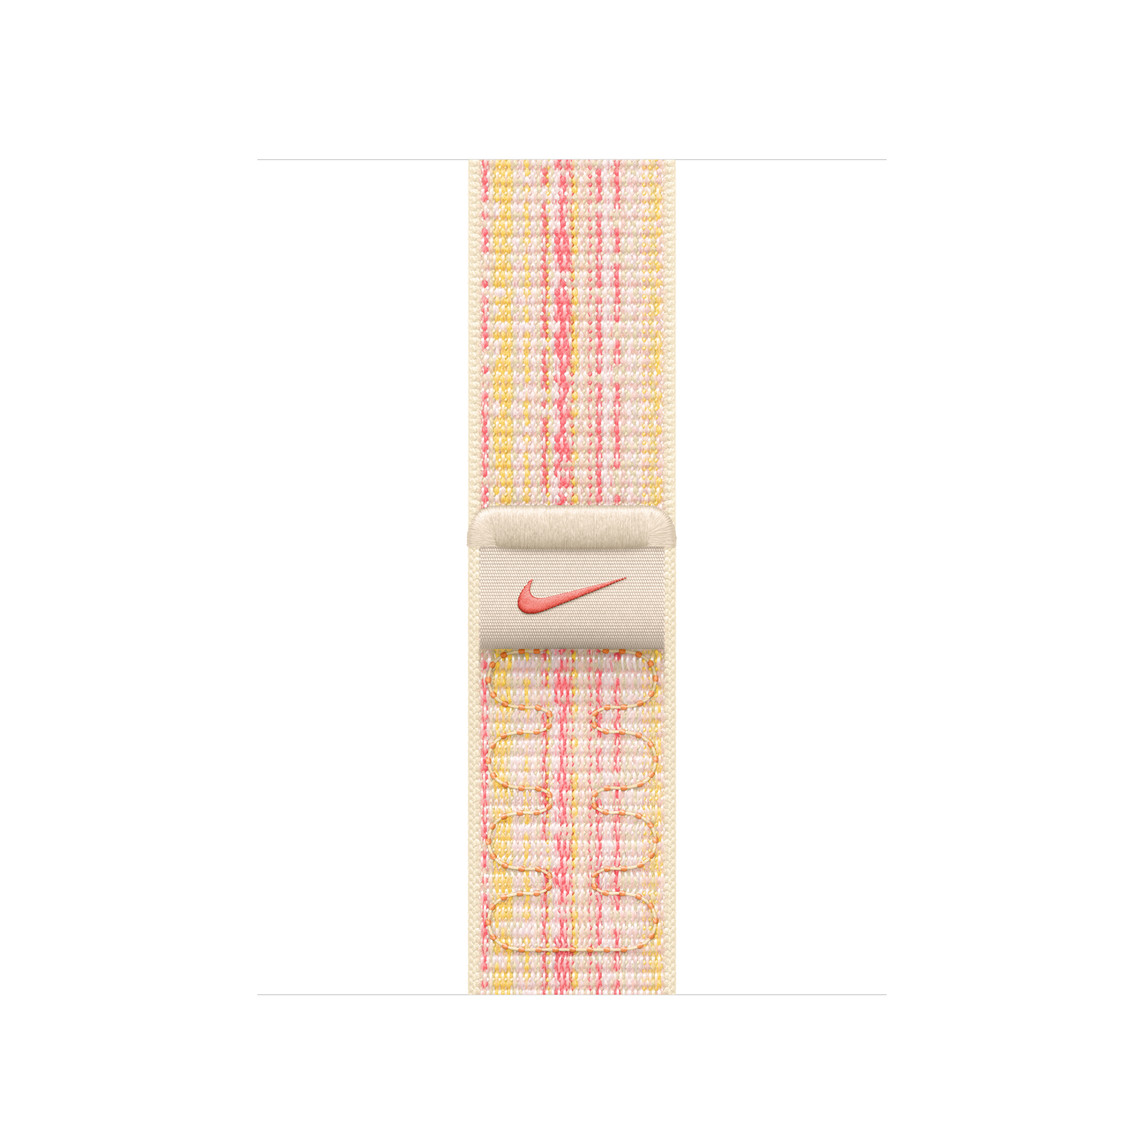 Starlight and Pink Sport Loop band, woven nylon with Nike swoosh logo, hook-and-loop fastener